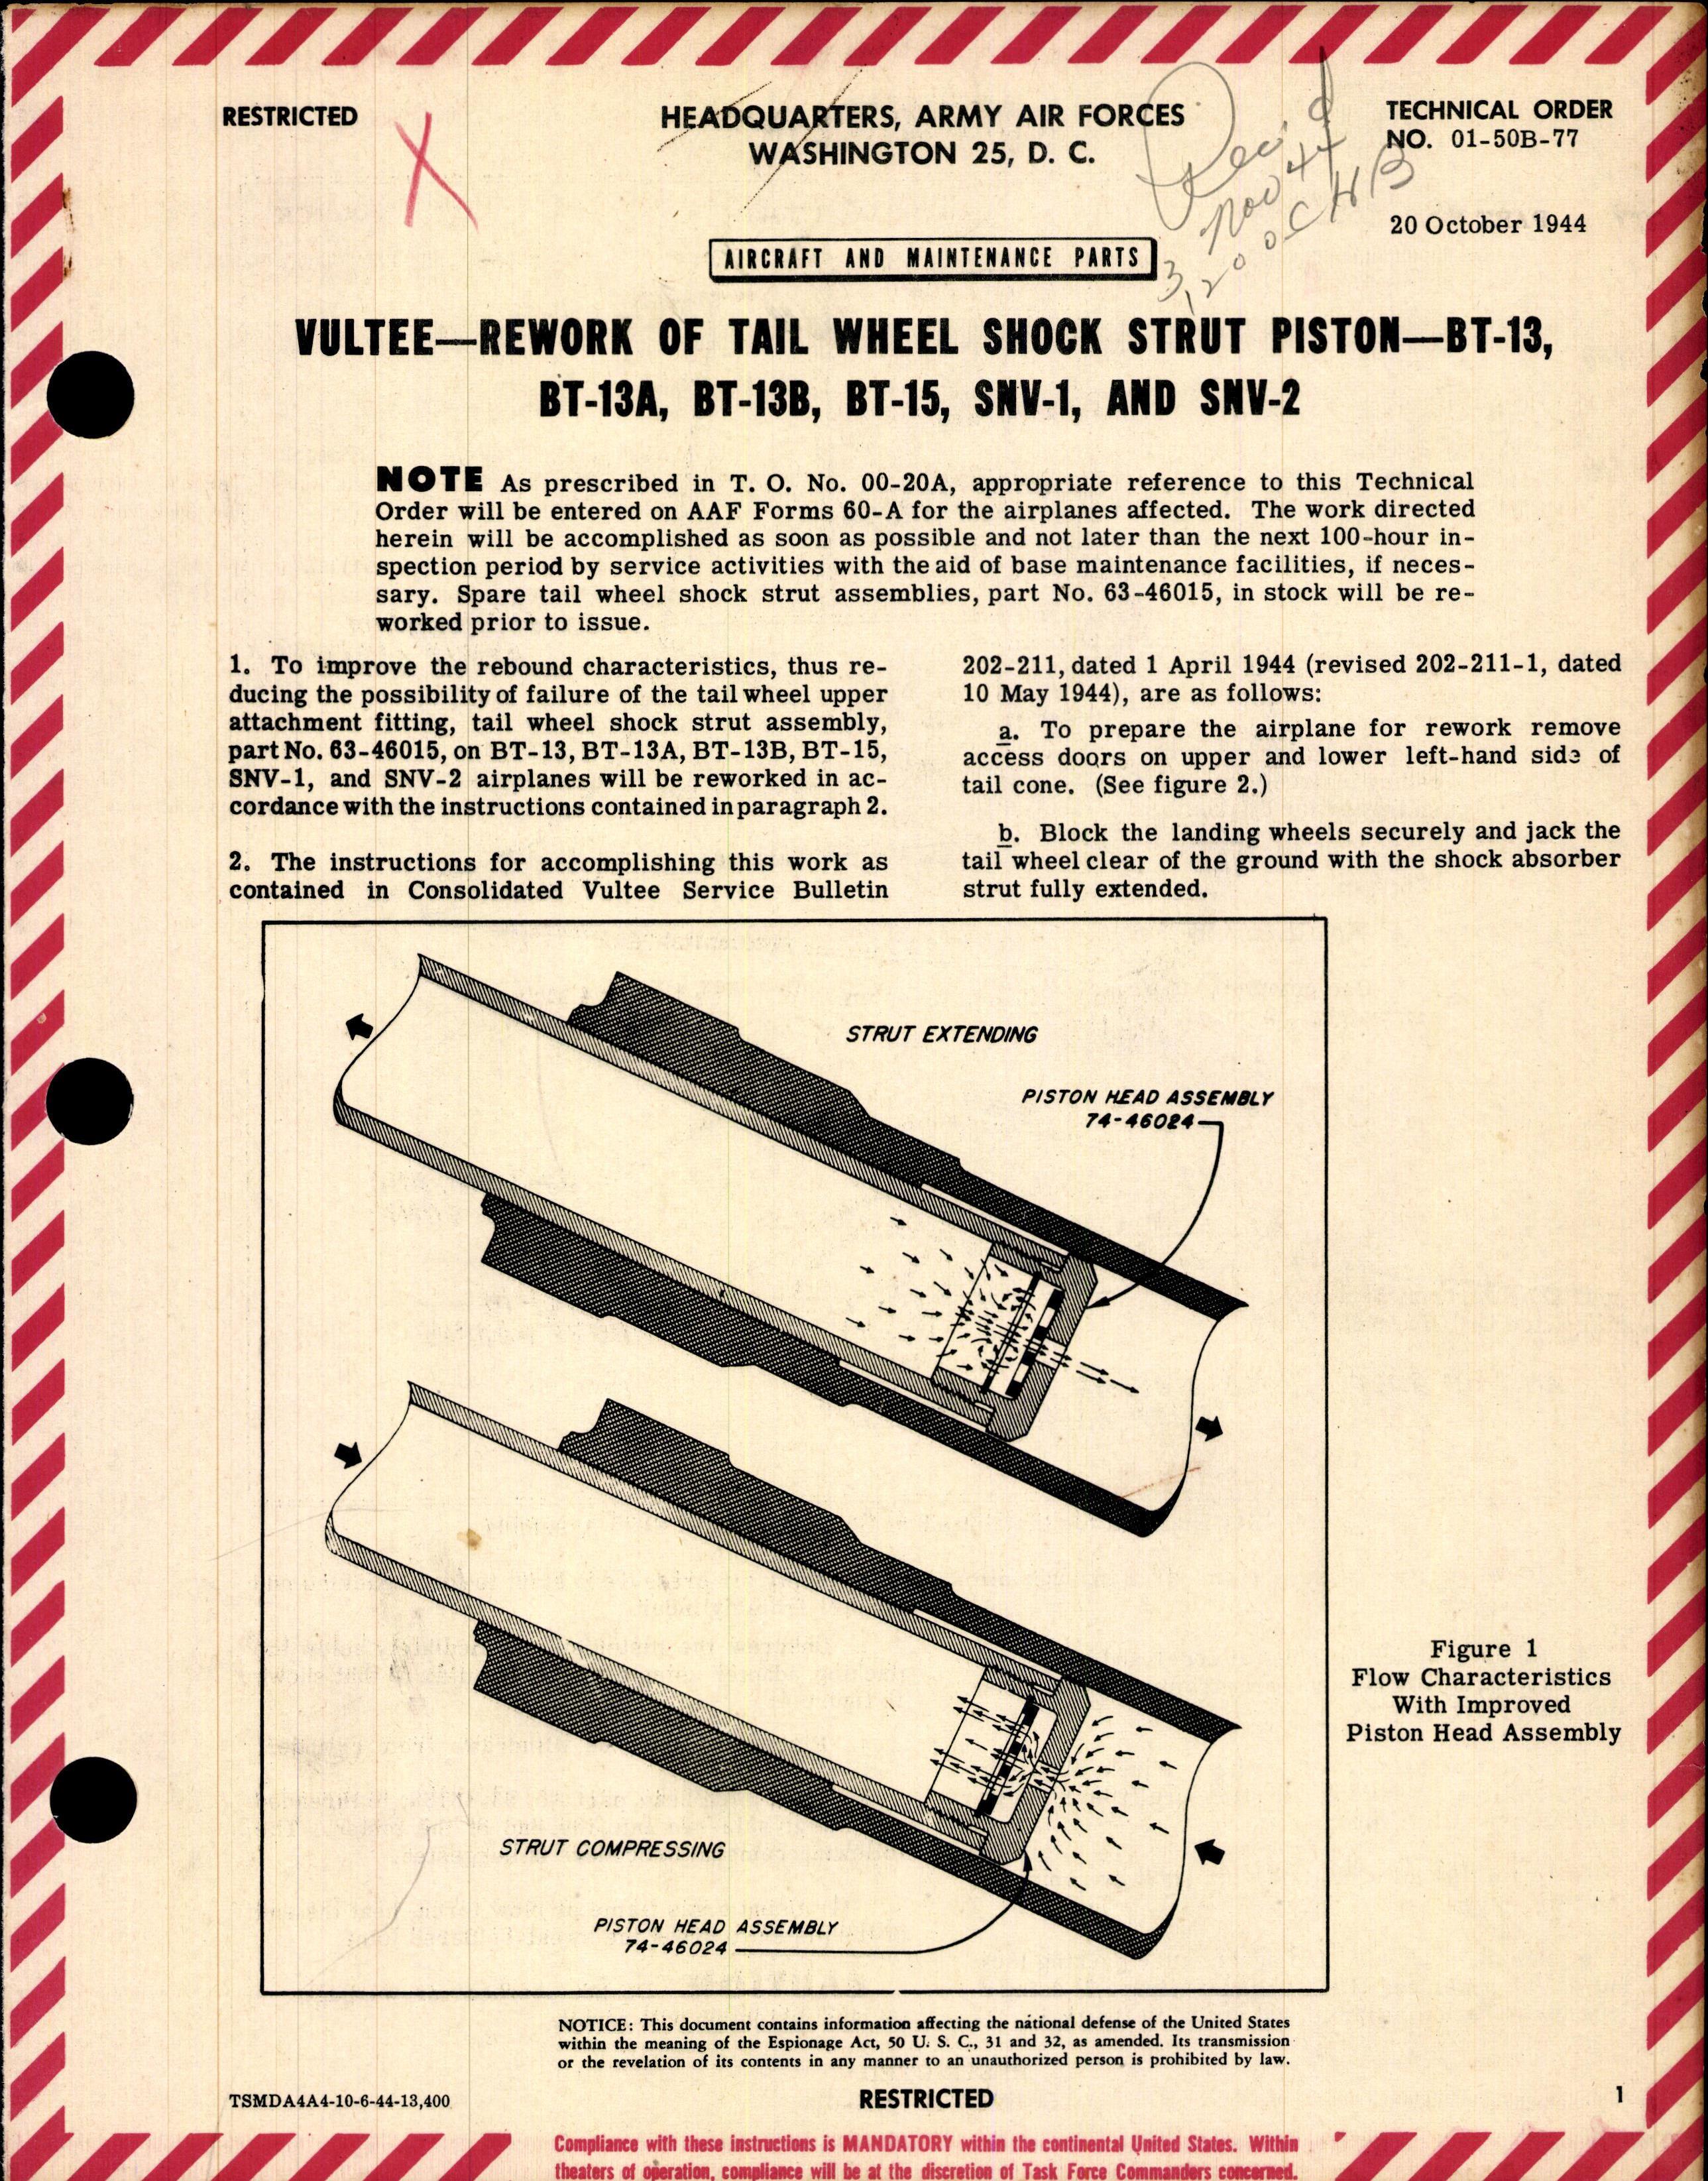 Sample page 1 from AirCorps Library document: Rework of Tail Wheel Shock Strut Piston - BT-13, BT-13A, BT-13B, BT-15, SNV-1 and SNV-2